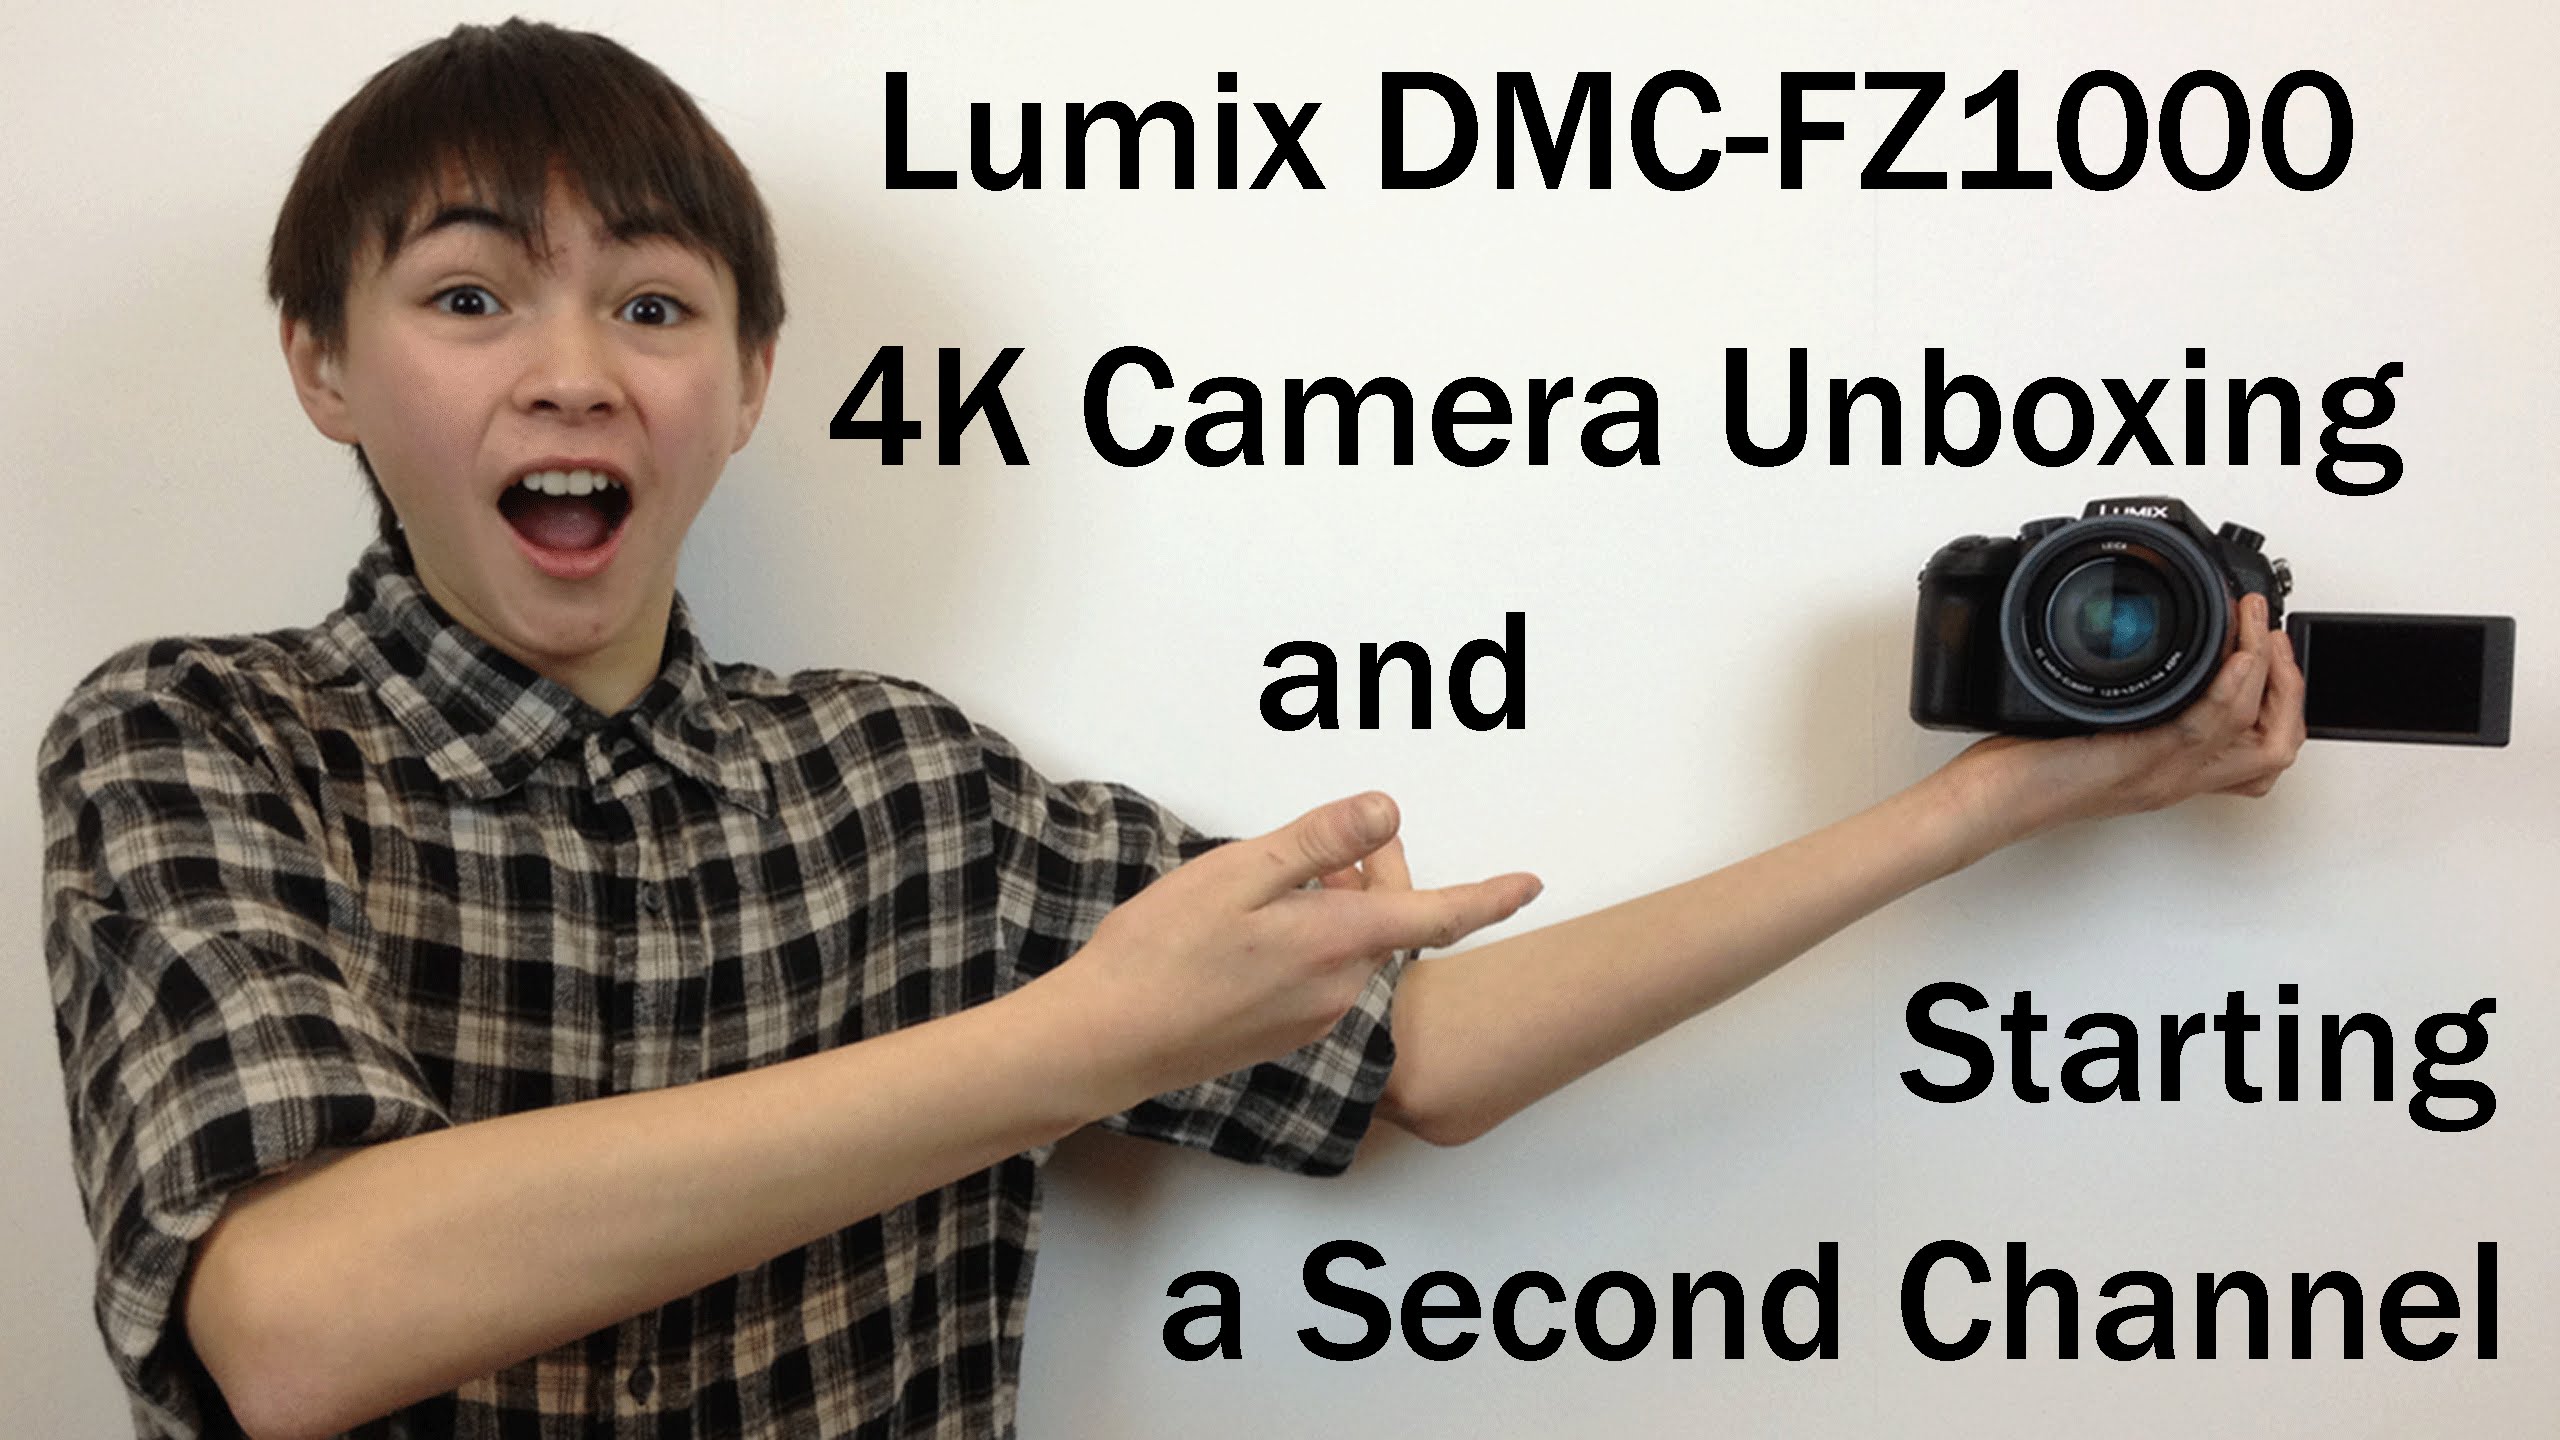 Lumix DMC-FZ1000 4K Camera Unboxing And Starting a Second Channel